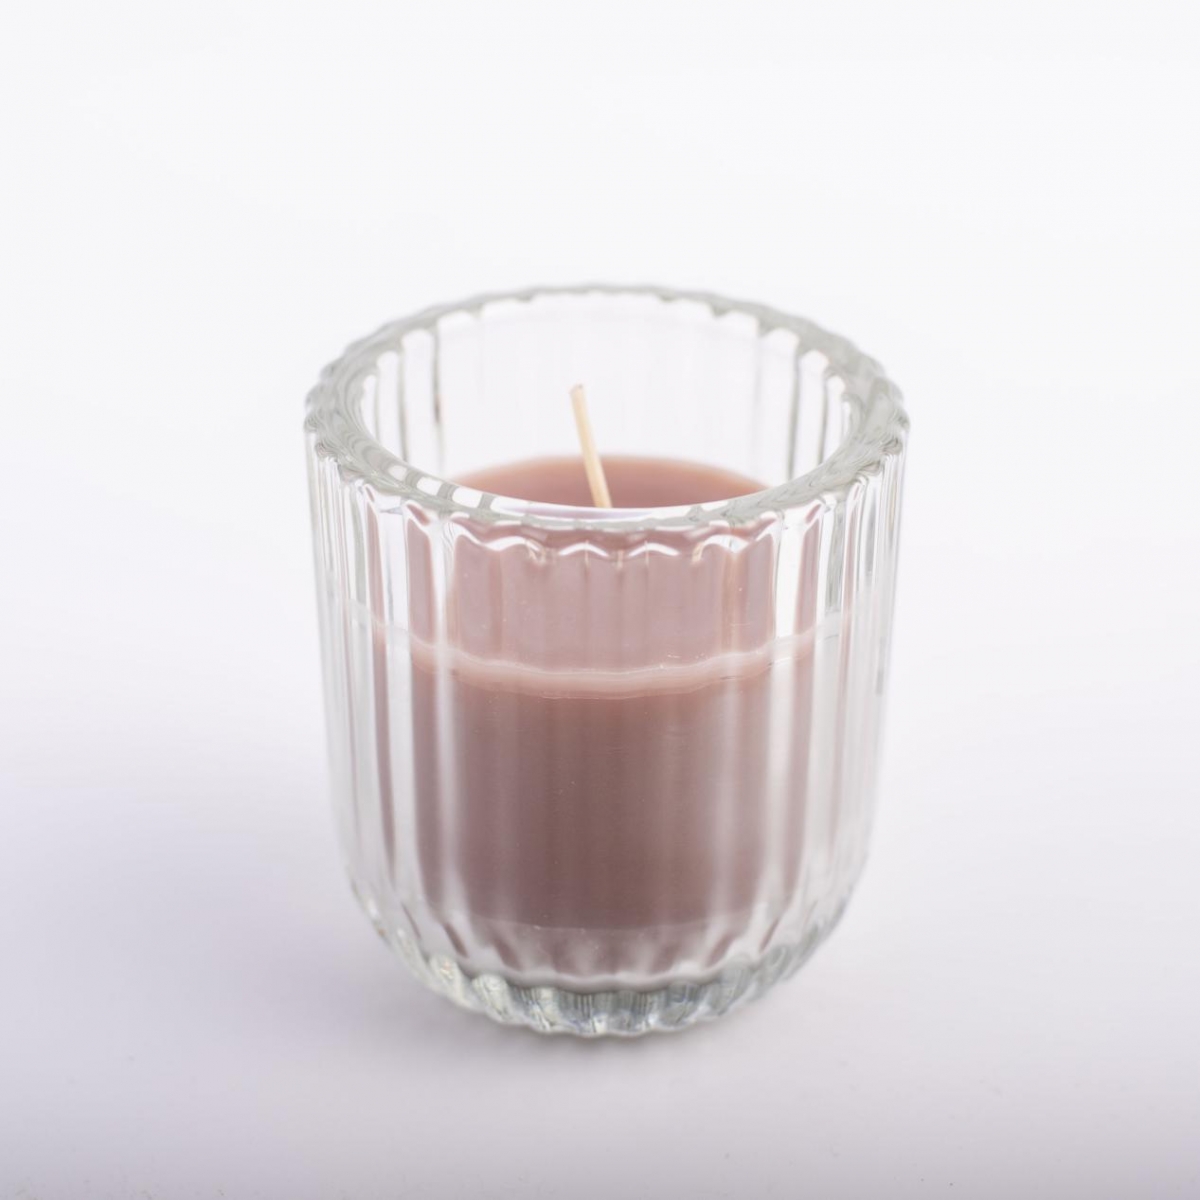 Vegan Candles – Soy Wax ,Natural Fragrance Oils , Crystal Candle Jar ,China Factory , Good Price-HOWCANDLE-Candles,Scented Candles,Aromatherapy Candles,Soy Candles,Vegan Candles,Jar Candles,Pillar Candles,Candle Gift Sets,Essential Oils,Reed Diffuser,Candle Holder,